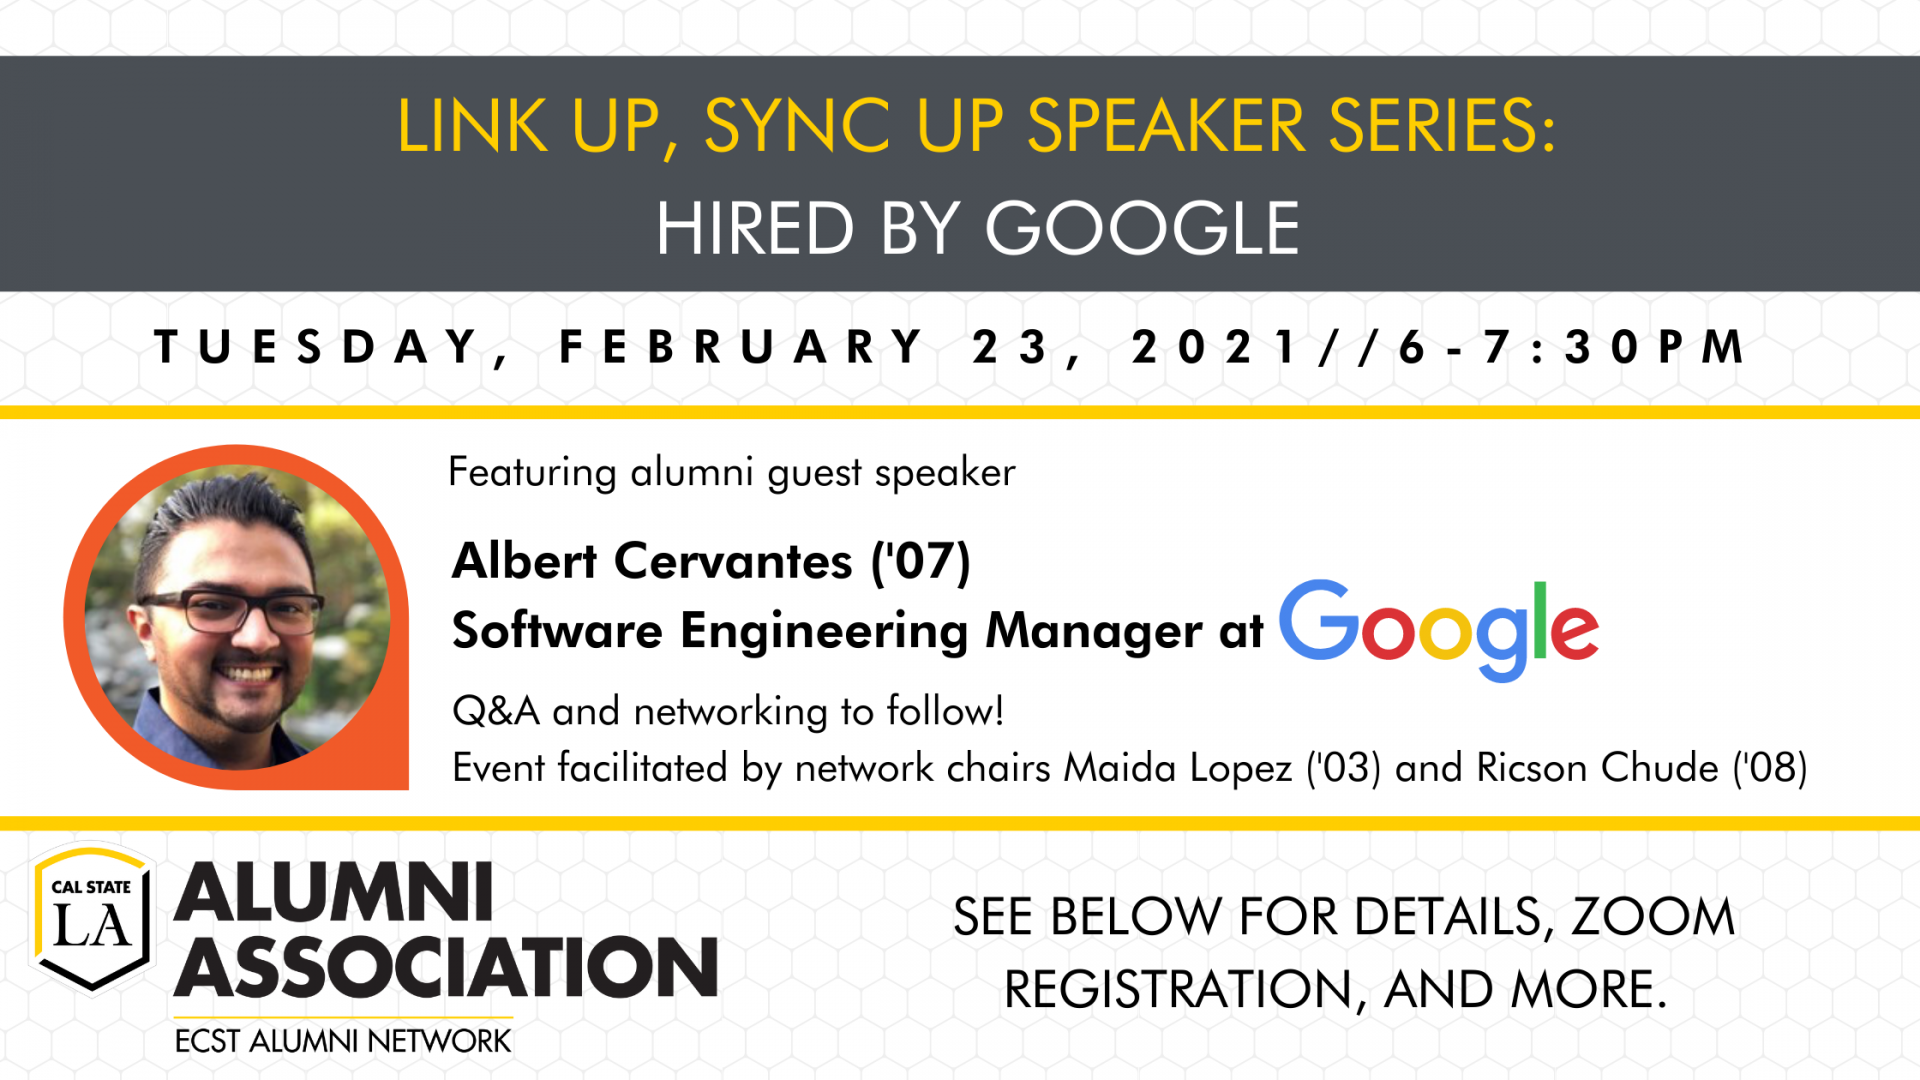 Hired by Google - Tuesday, February 23, 2021 via Zoom